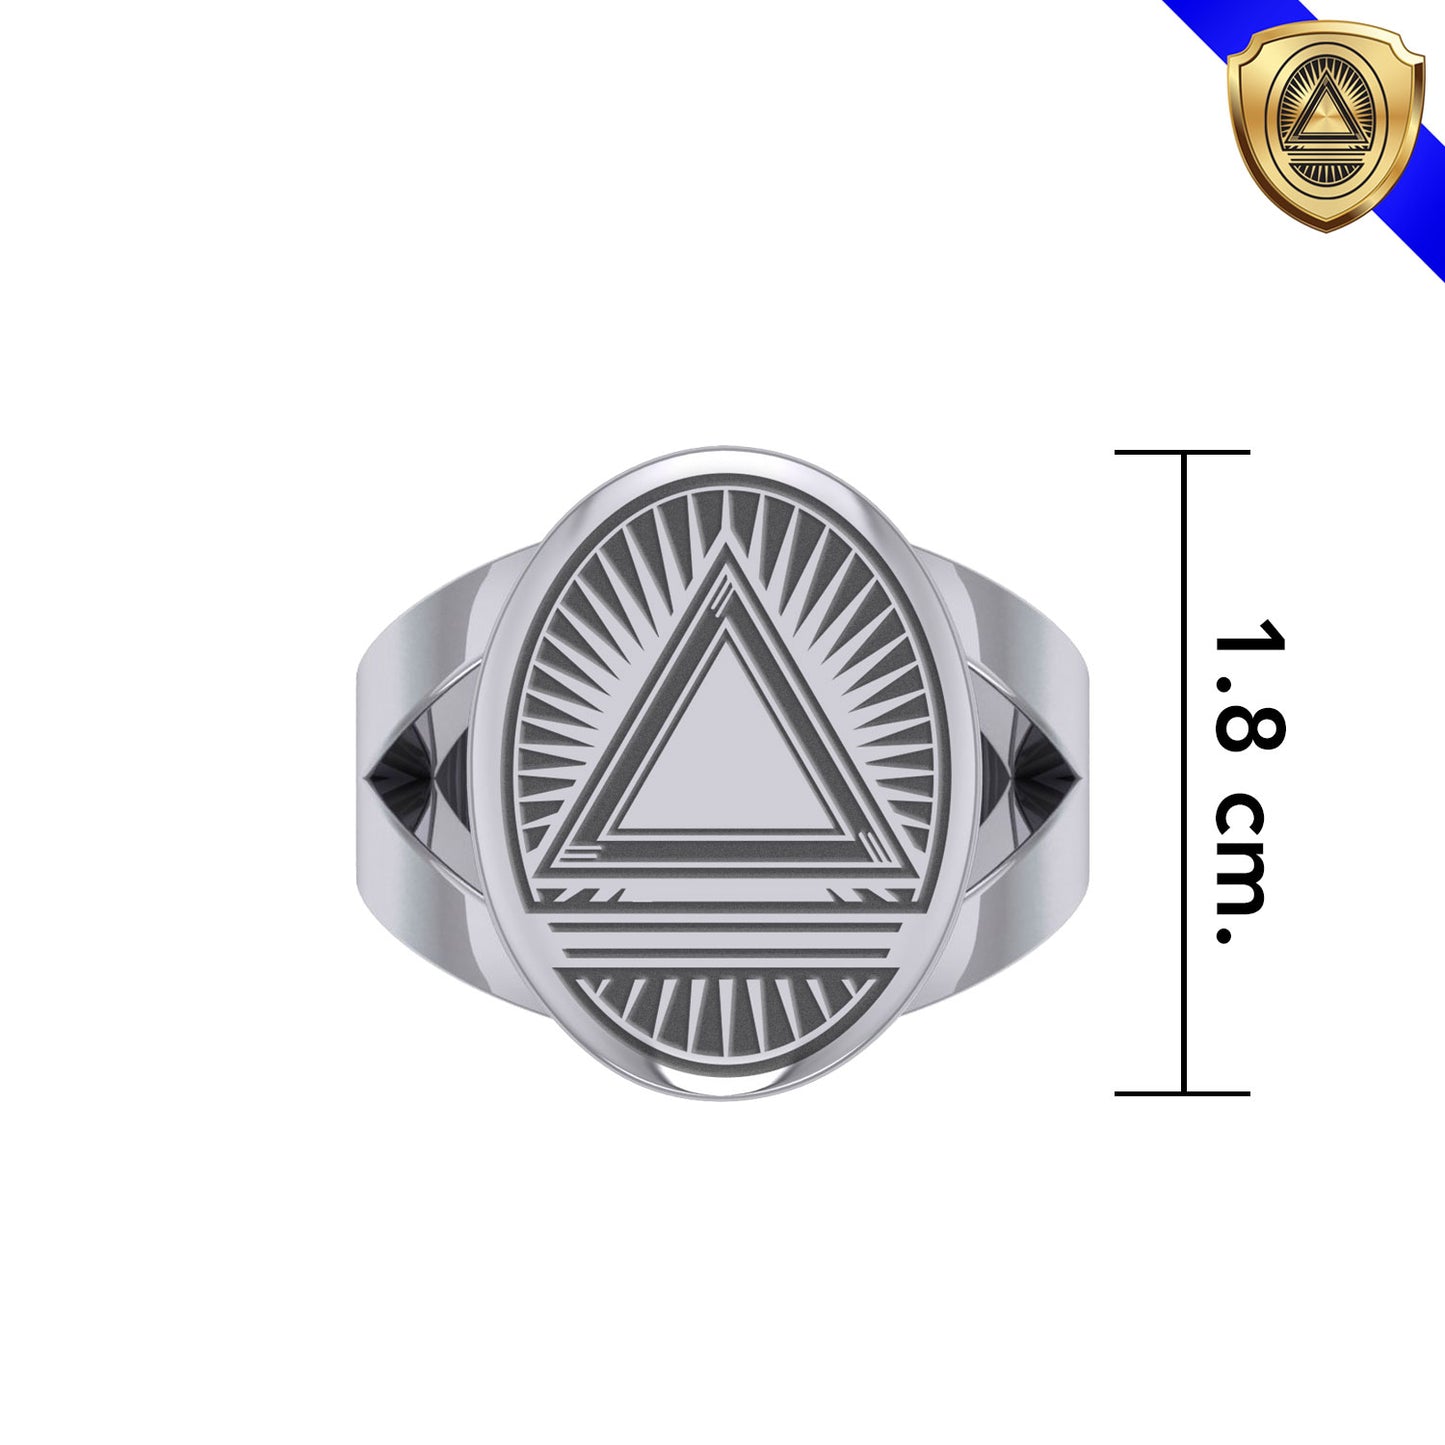 System Energy Symbol Silver Large Ring TRI1037